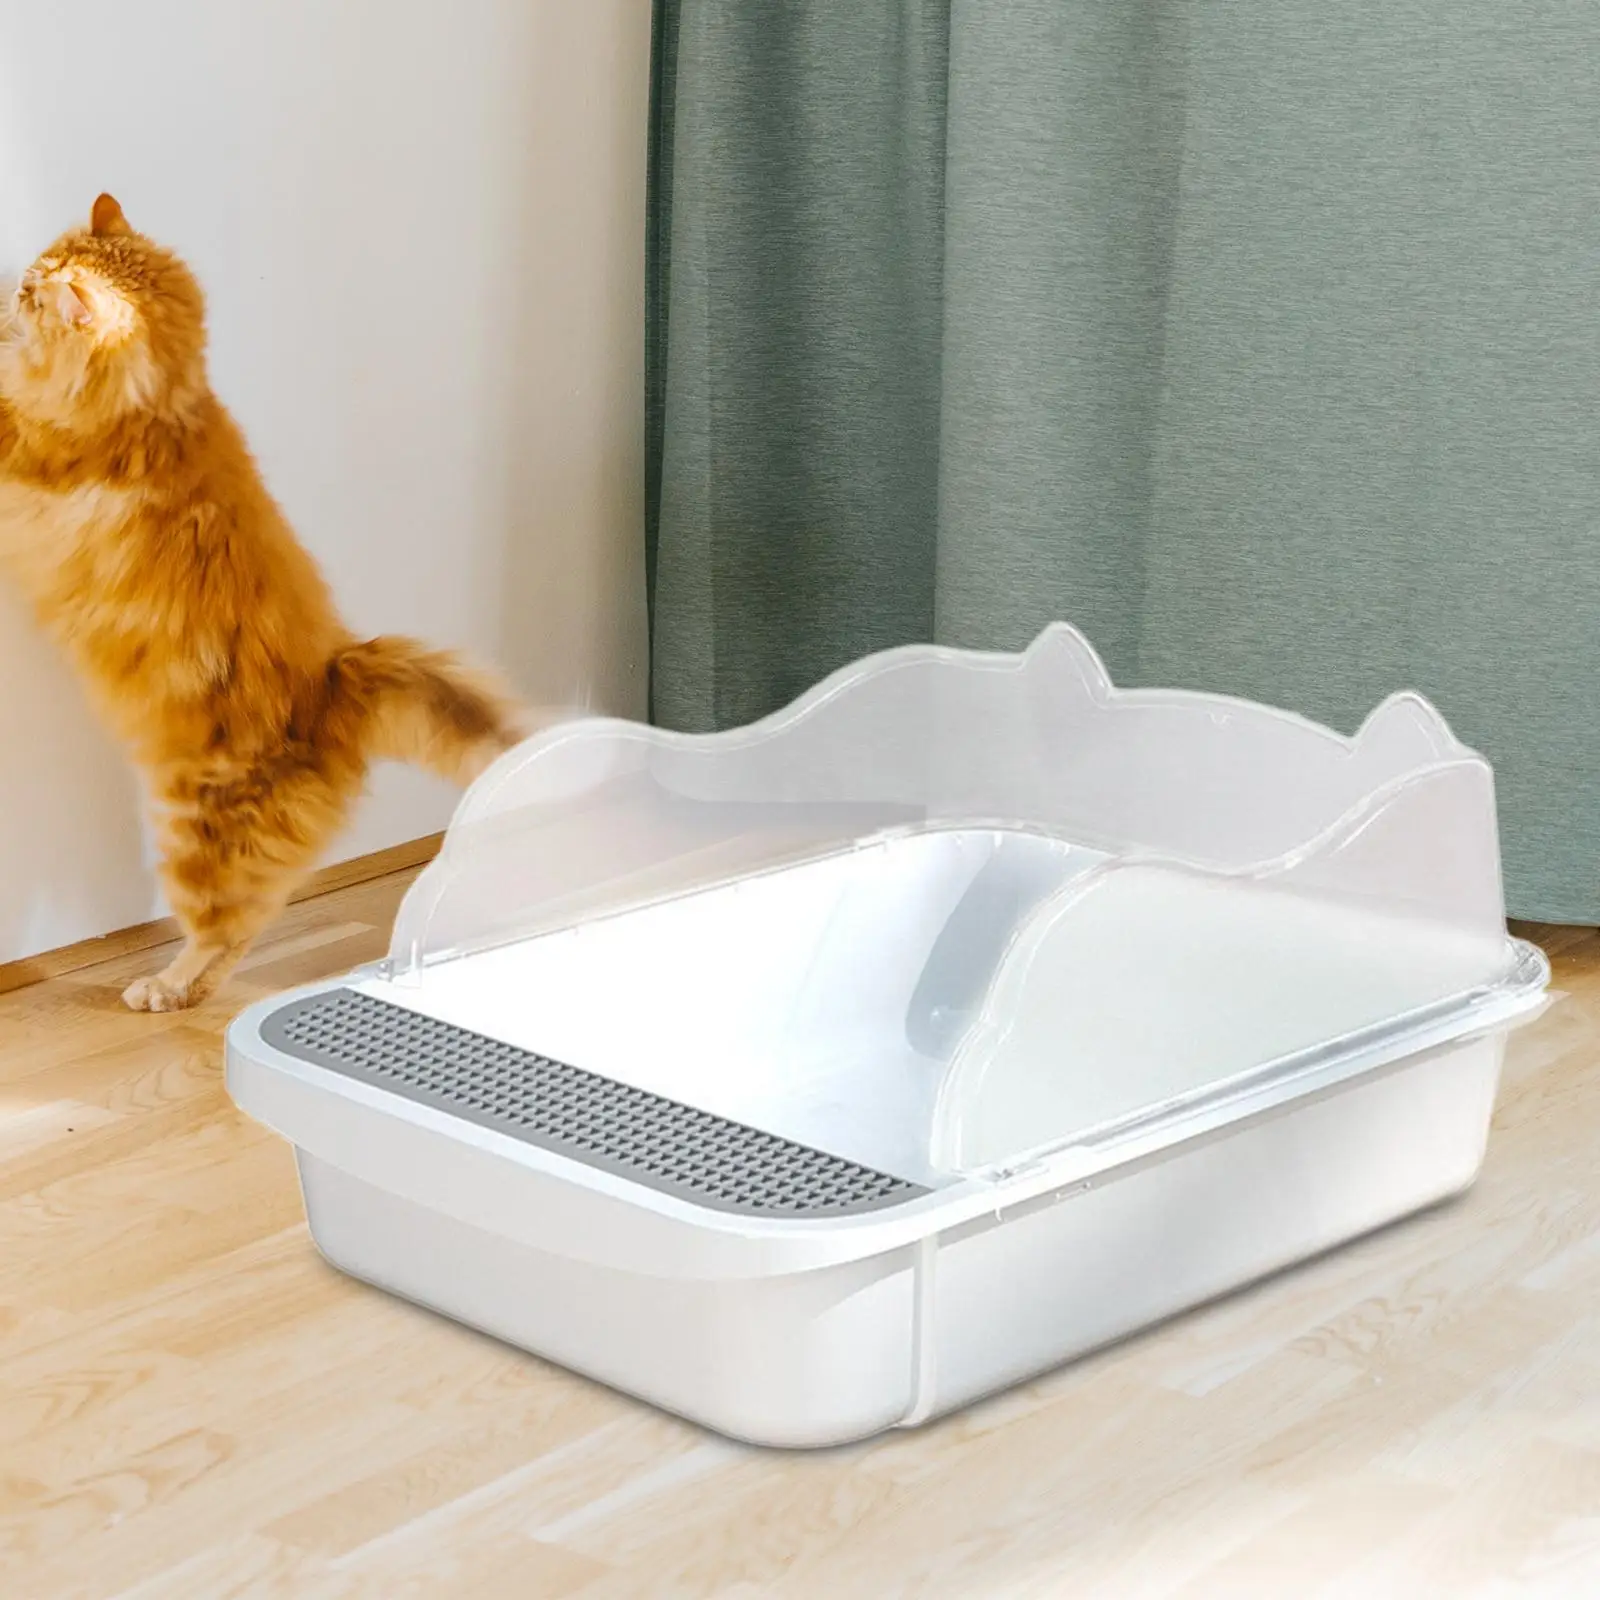 Cat Litter Tray Splashproof with High Sides Semi Closed Cats Litter Pan Litter Pan Pet Supplies for Dog Rabbits Indoor Cats